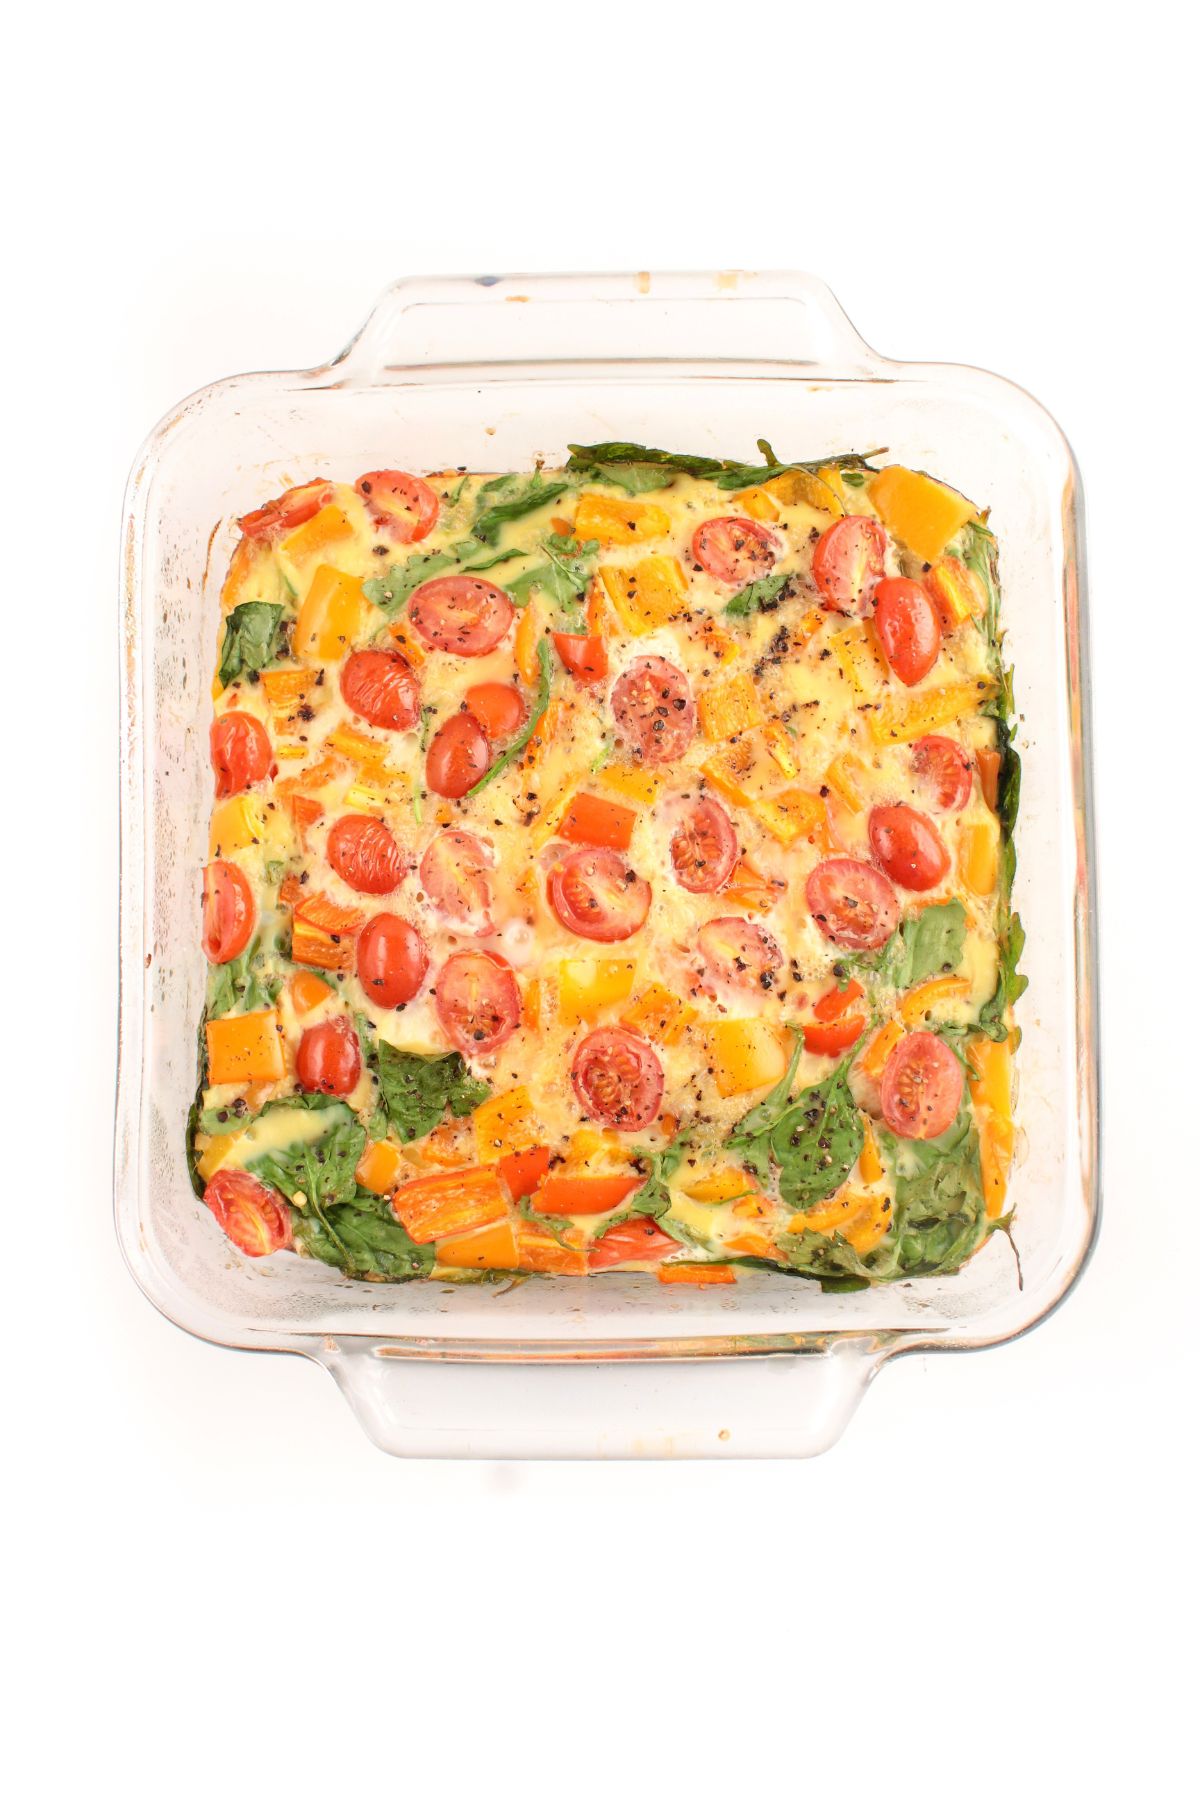 baked eggs with vegetables in a glass baking dish